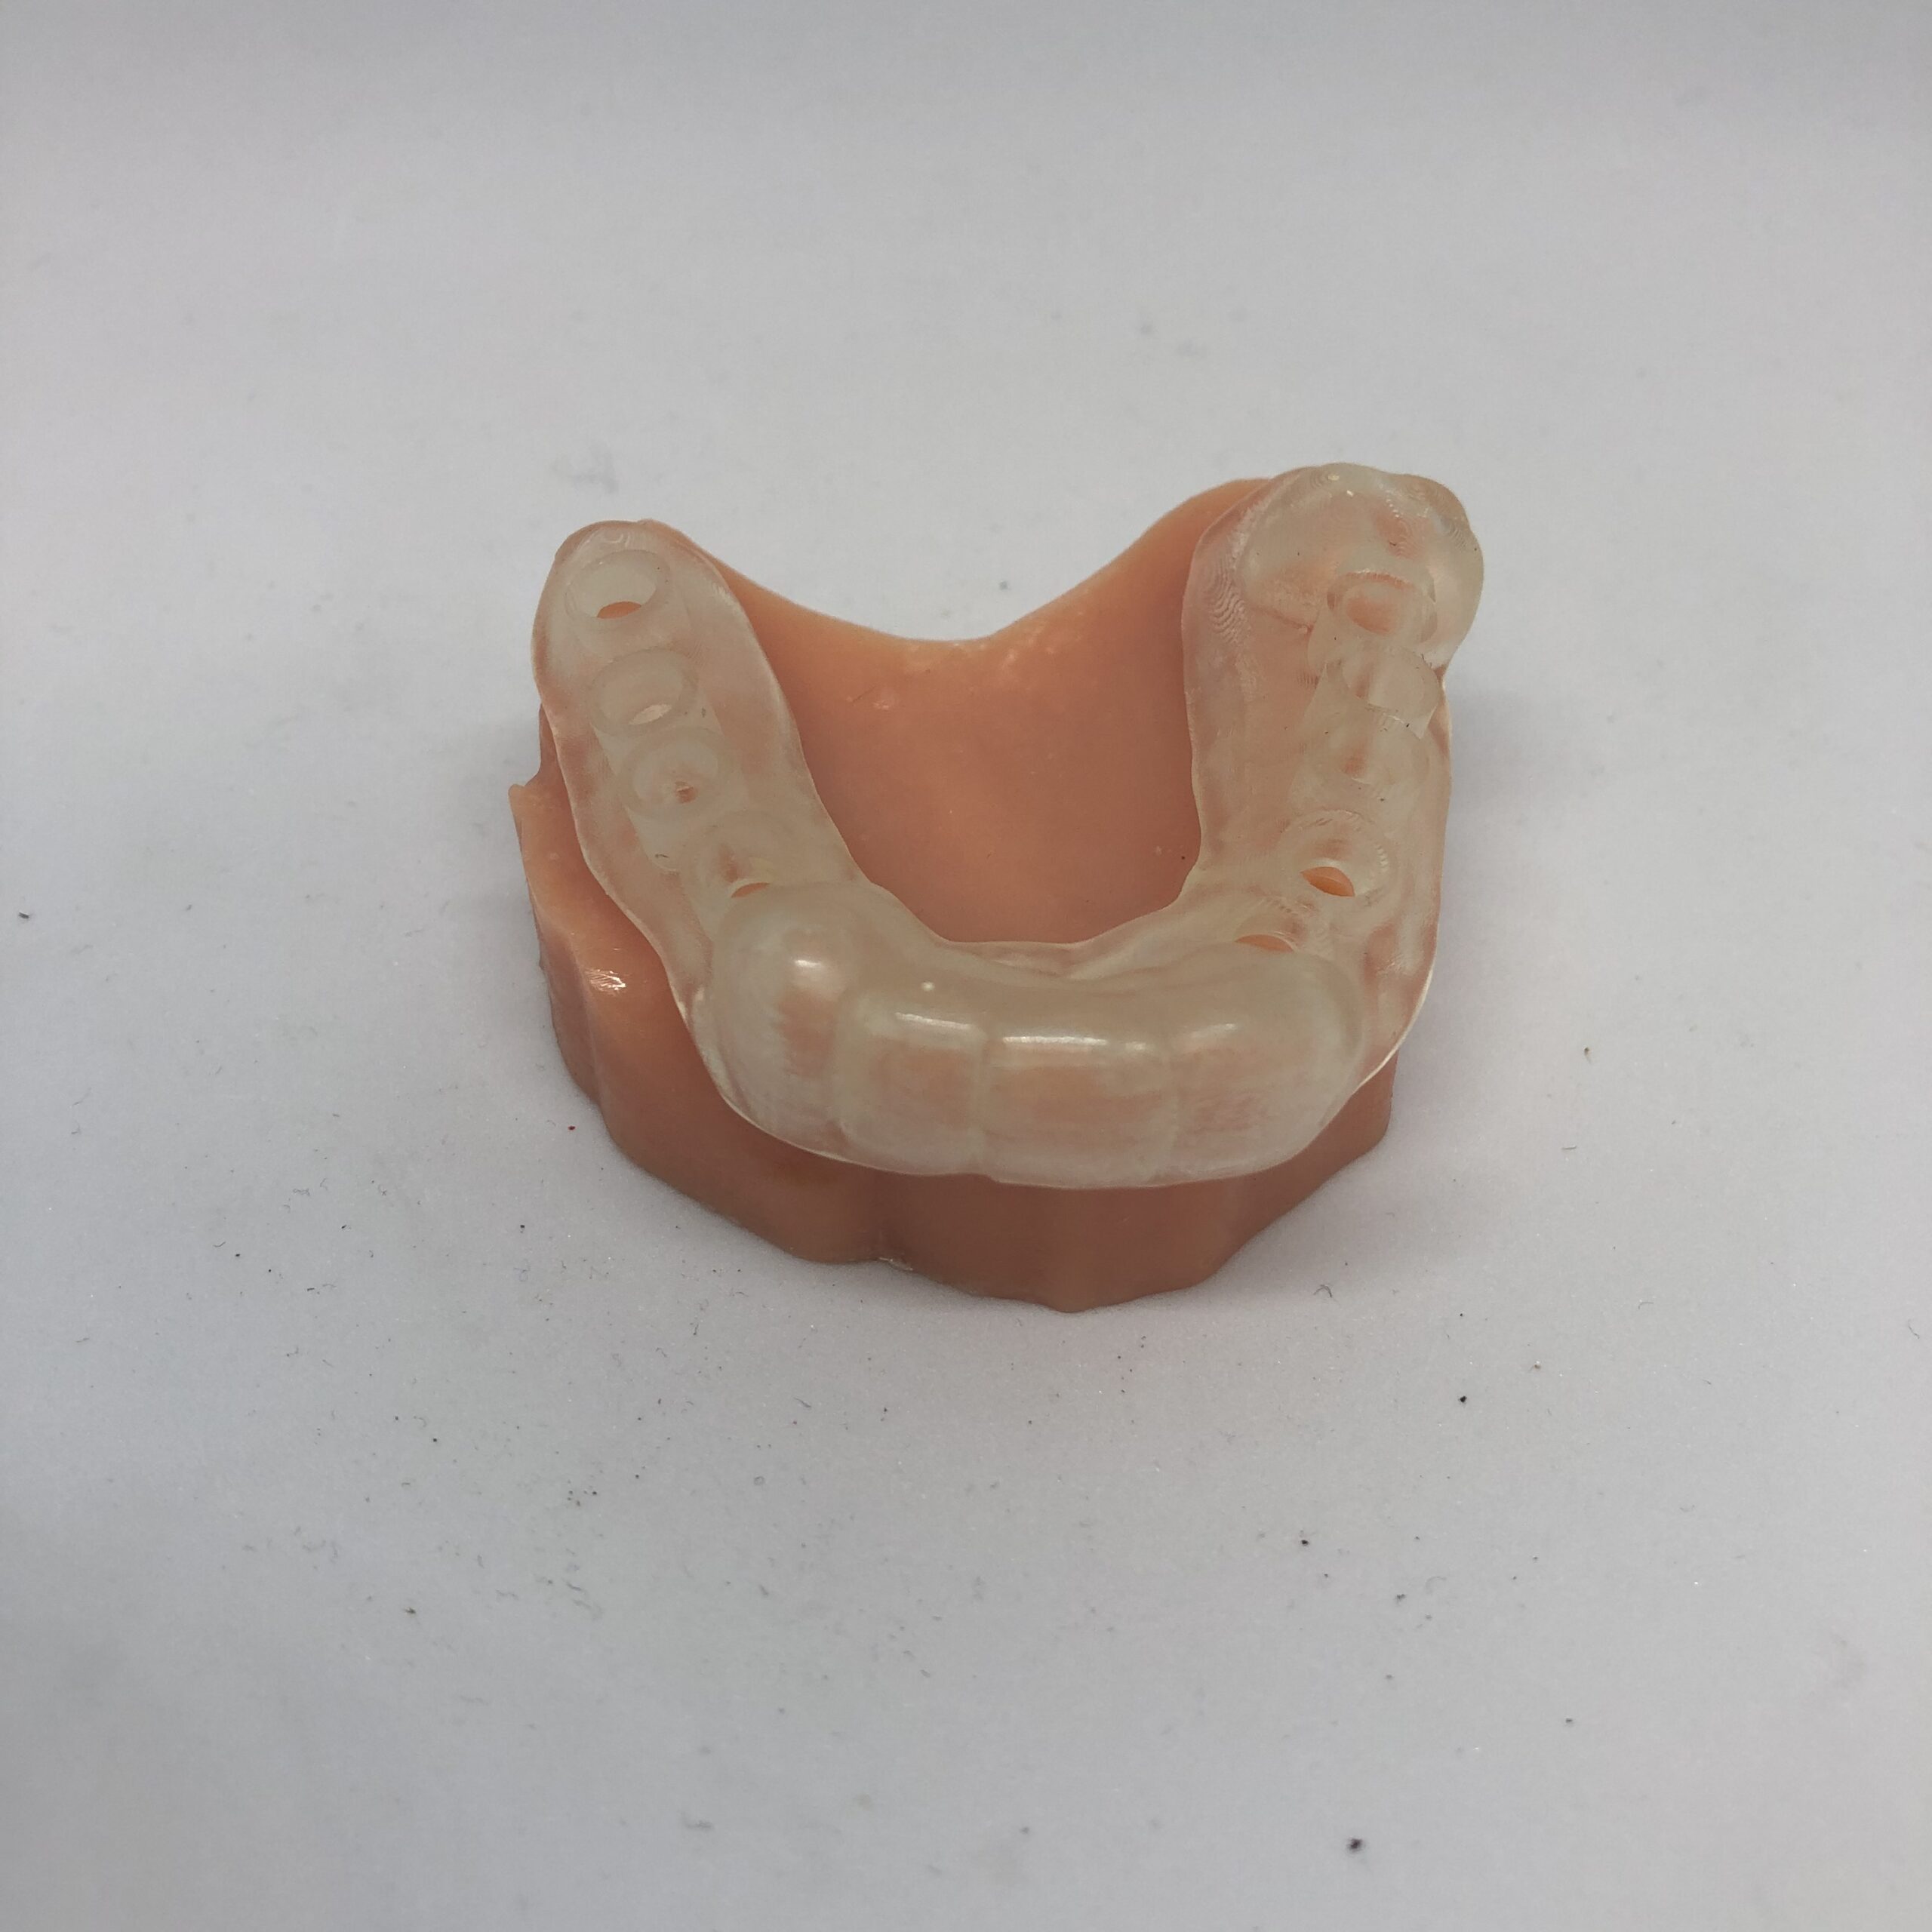 3D Printing for the Dental Industry